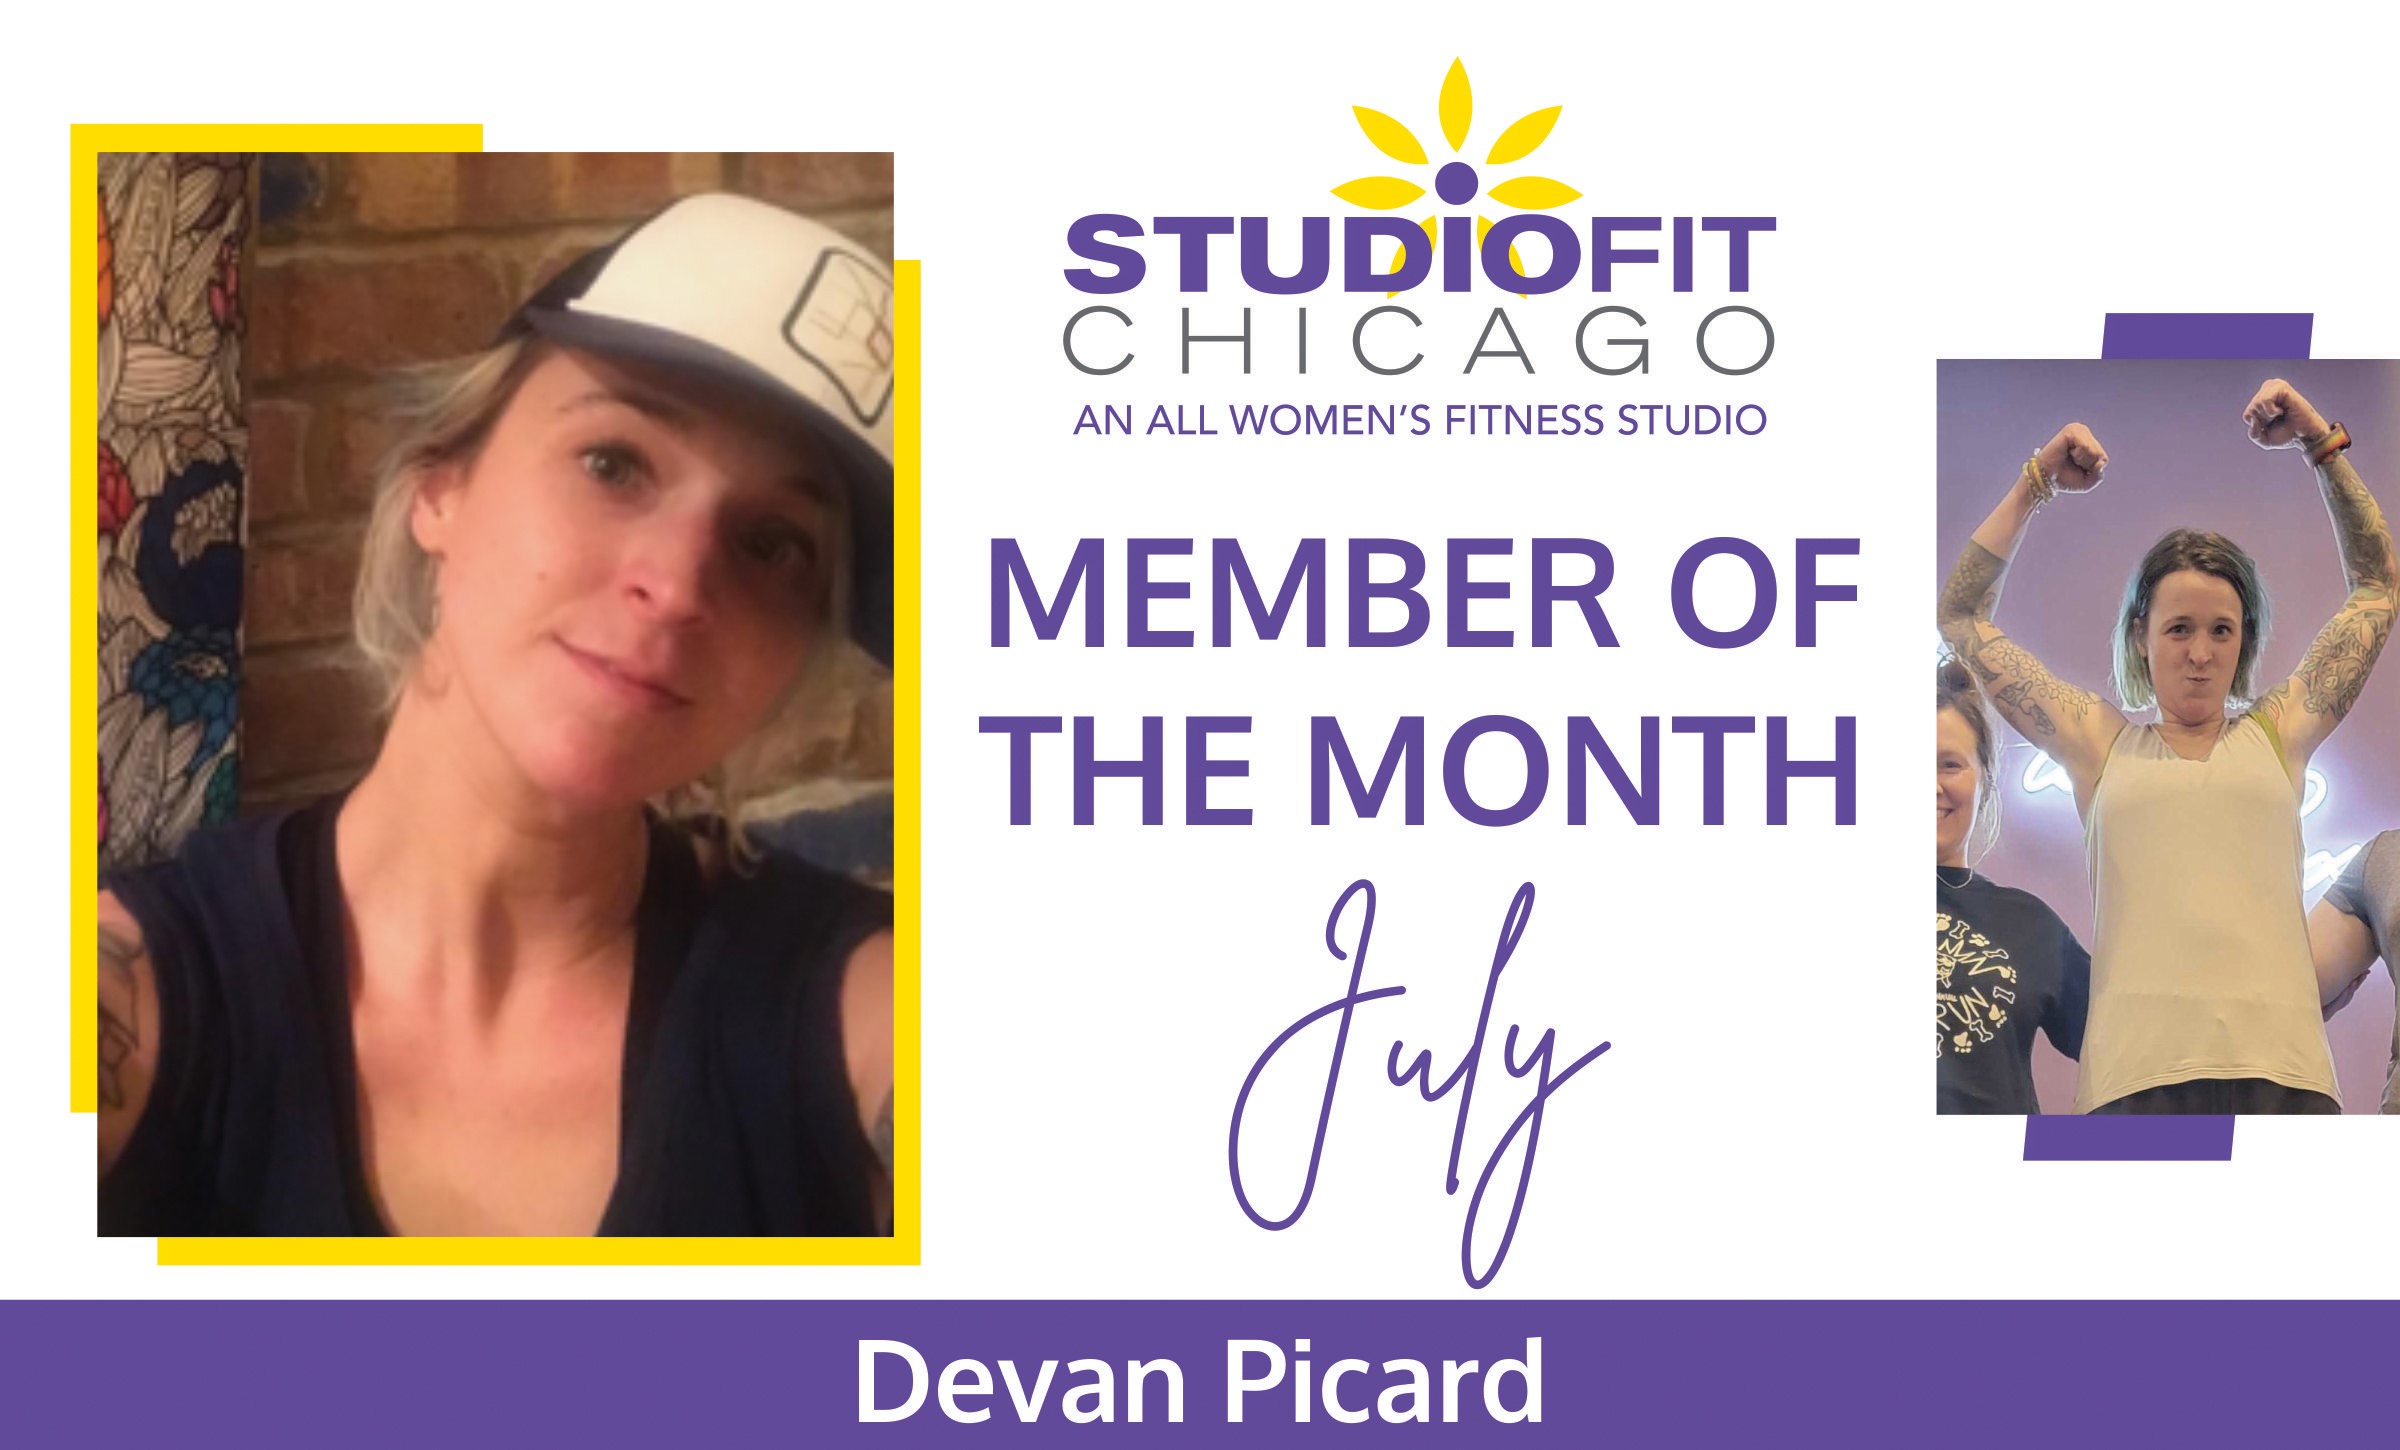 Devan-Picard-Studio-Fit-Chicago's-Member-of-the-month-for-July